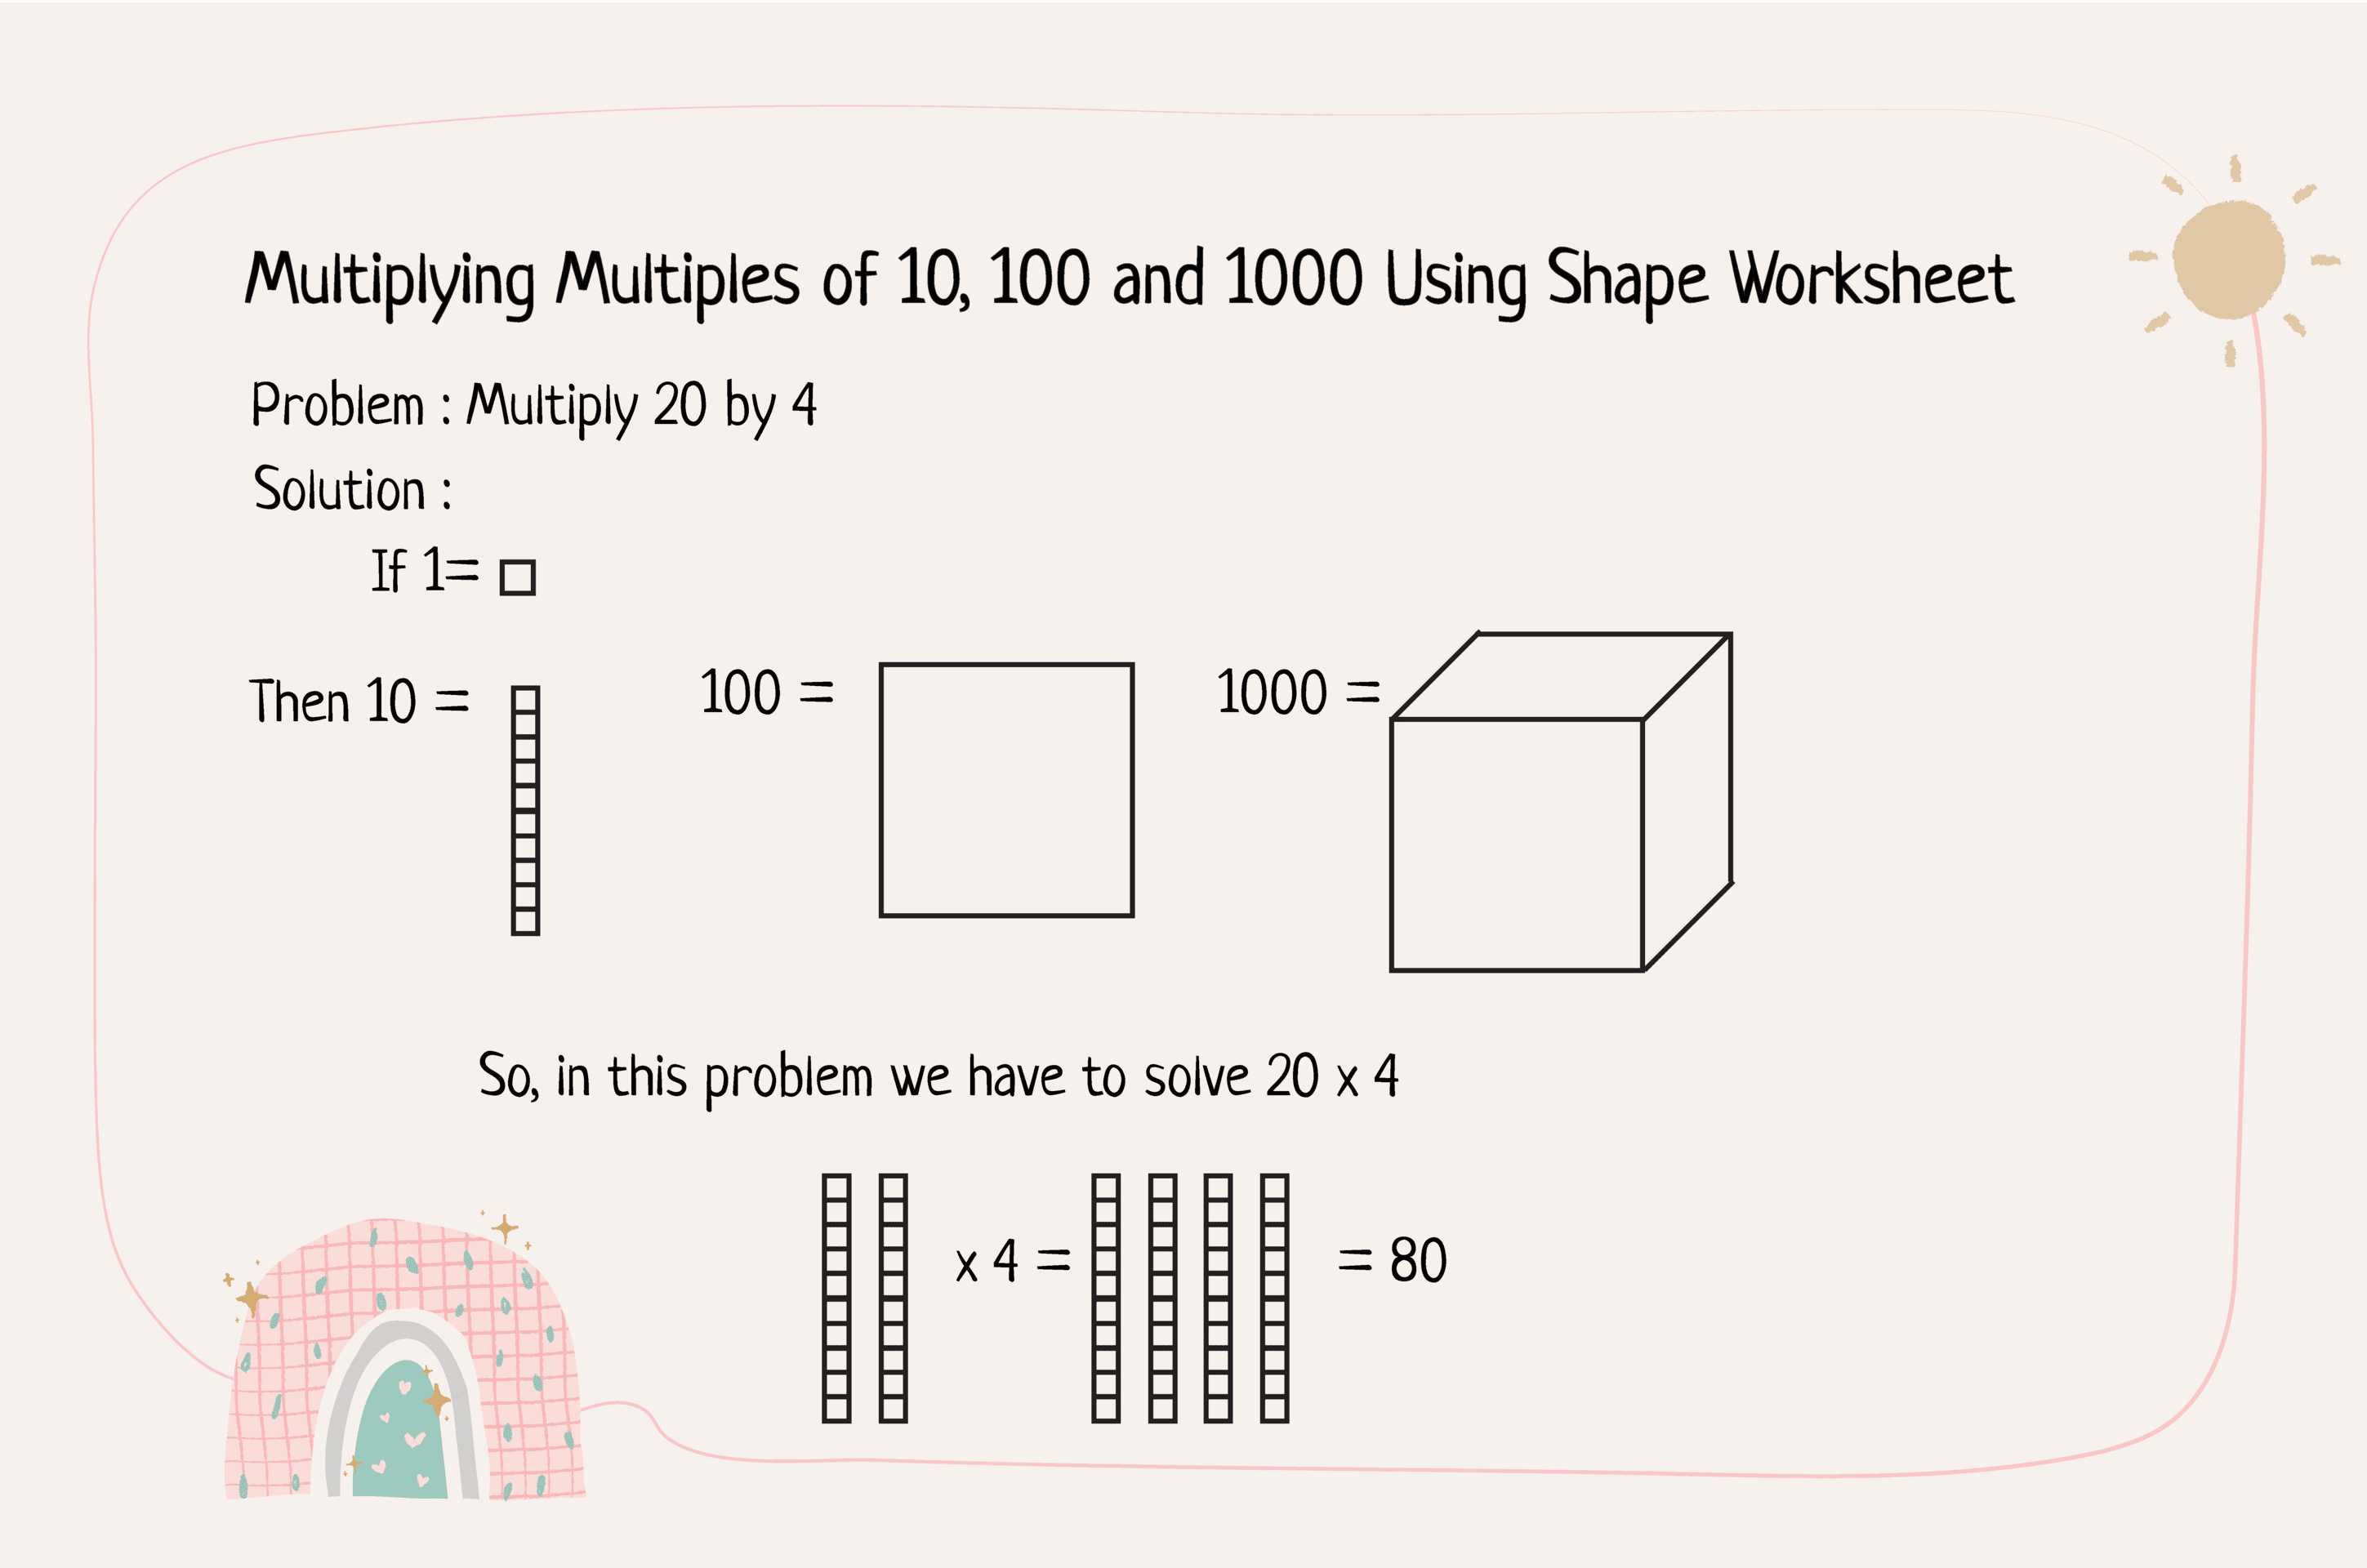 6. Explaining a problem related to multiplying by multiples of 10 100 and 1000